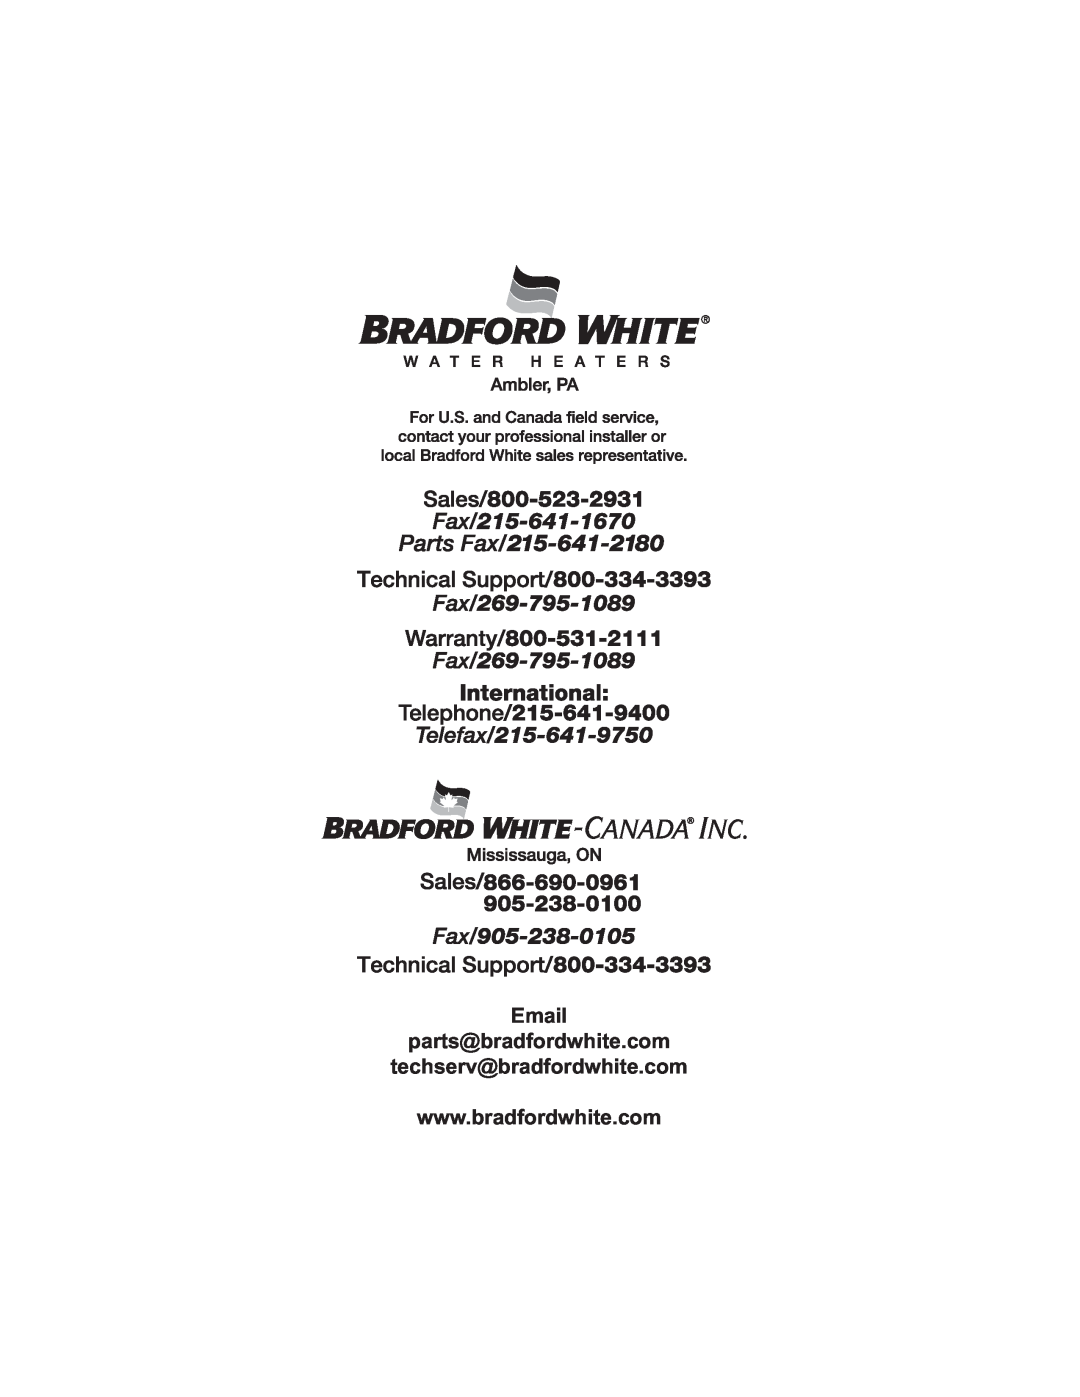 Bradford-White Corp 15, 12, 13 dimensions Email parts@bradfordwhite.com techserv@bradfordwhite.com 